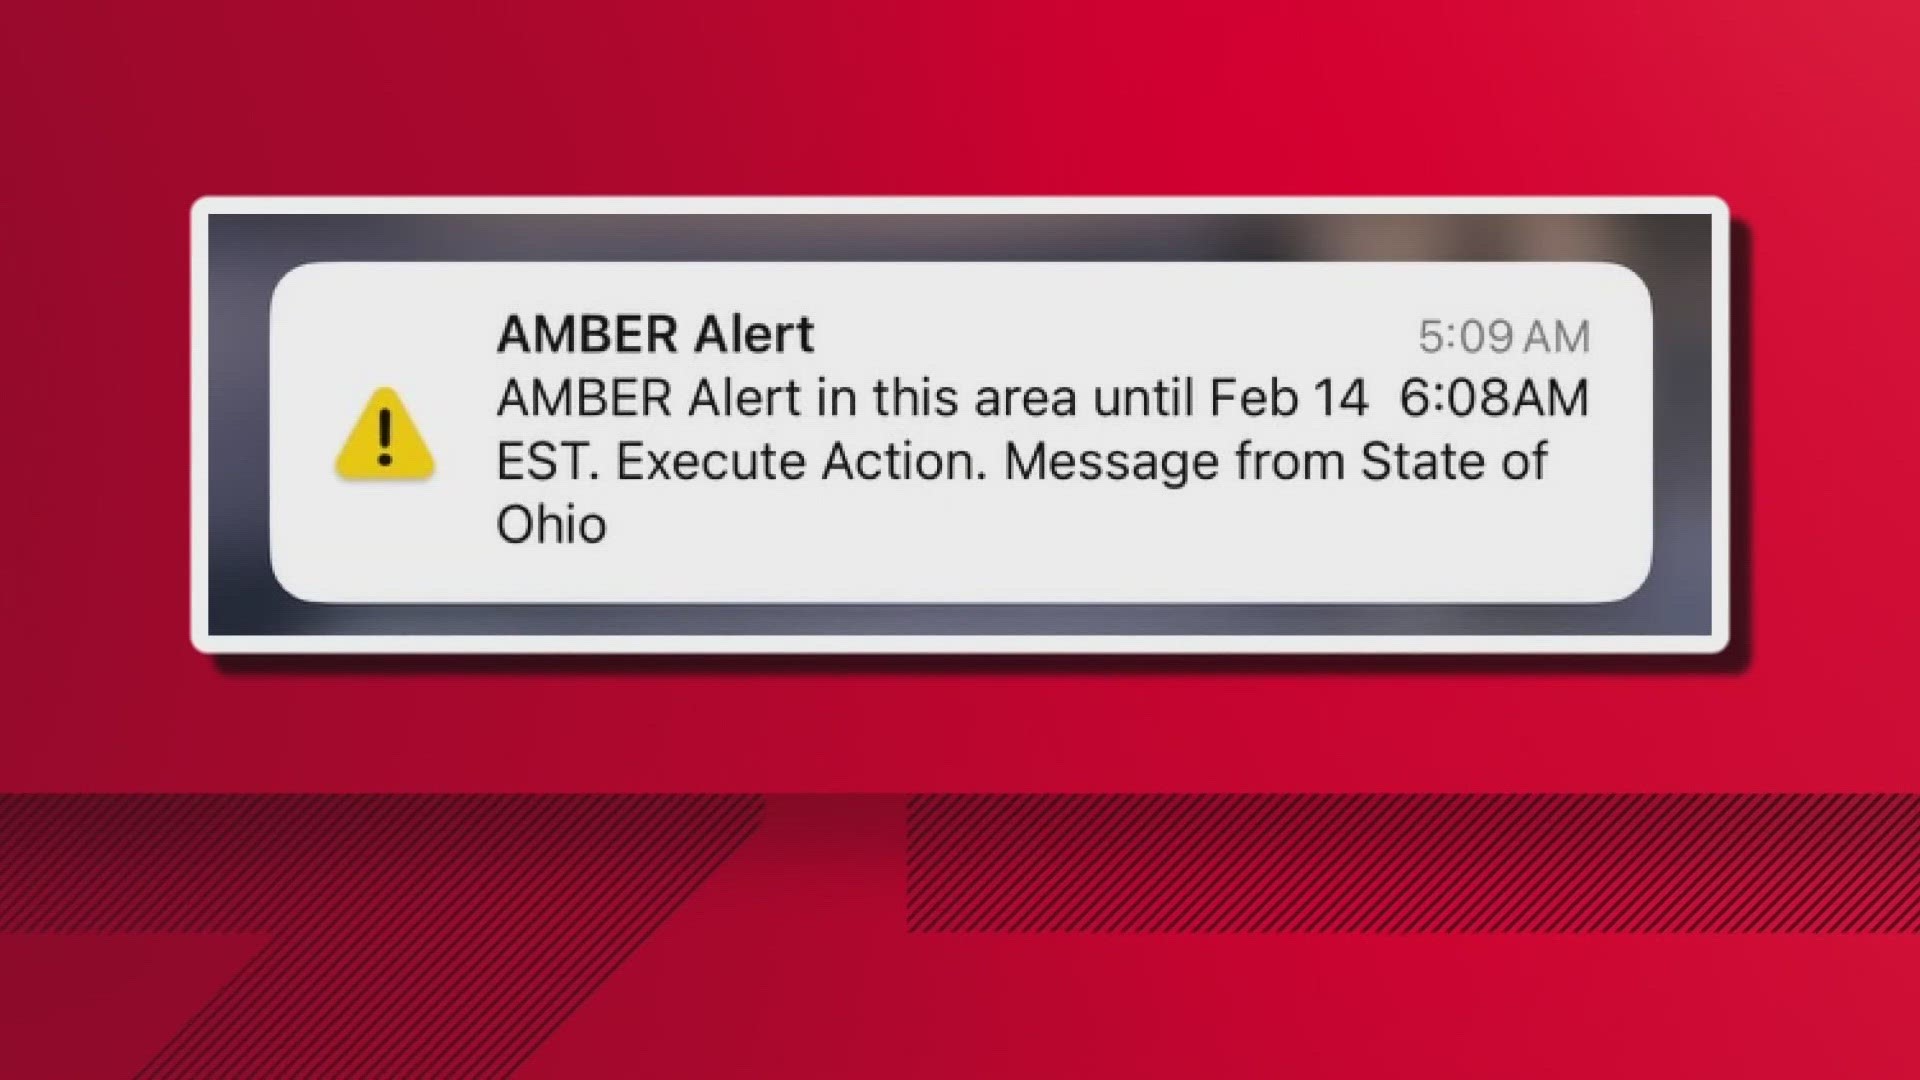 Ohio residents received an AMBER Alert early Wednesday morning, but the notification didn't look right for everyone.